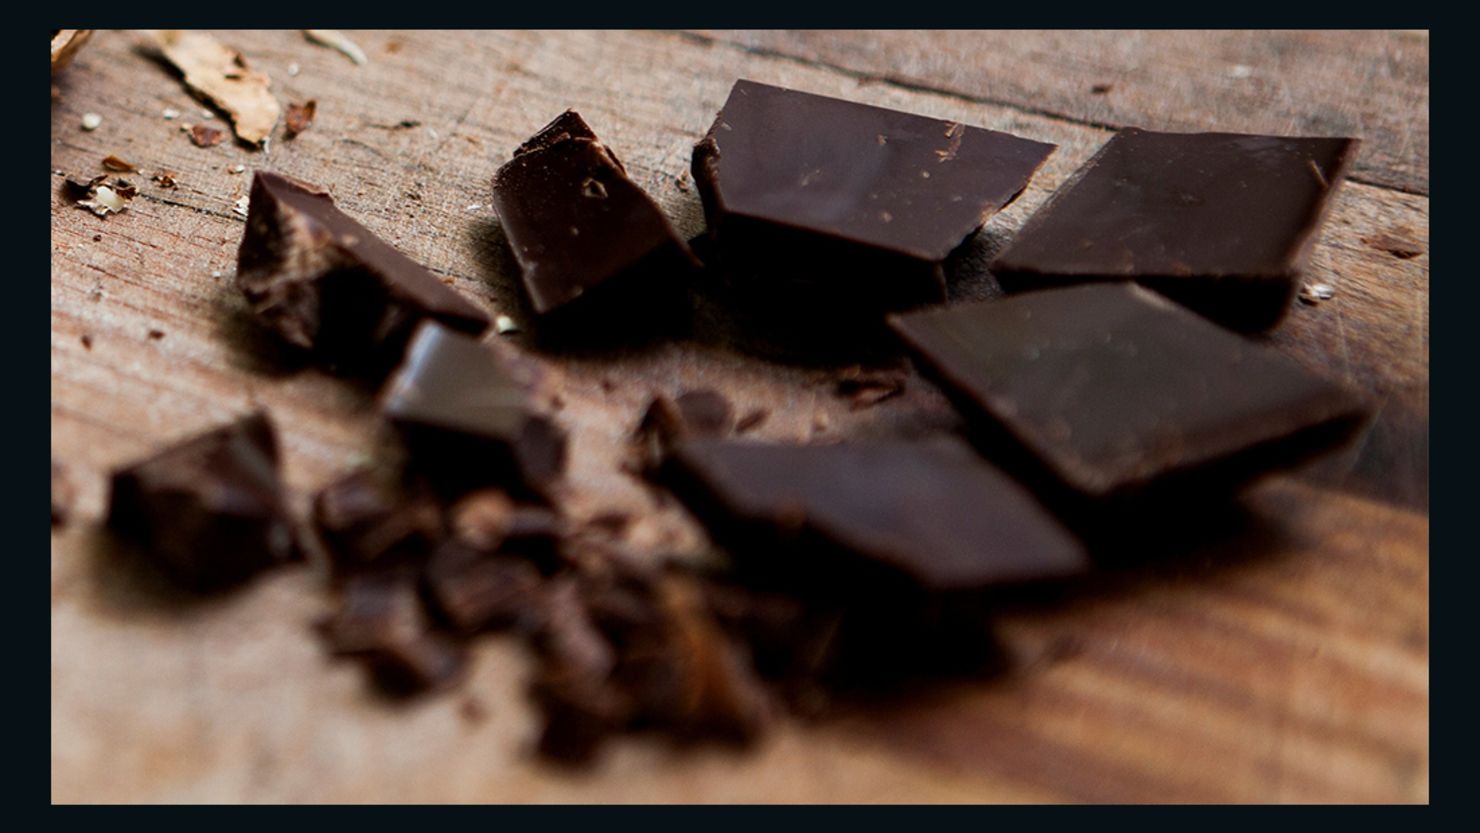 Chocolate is a known mood booster, as cocoa raises serotonin levels in the brain.